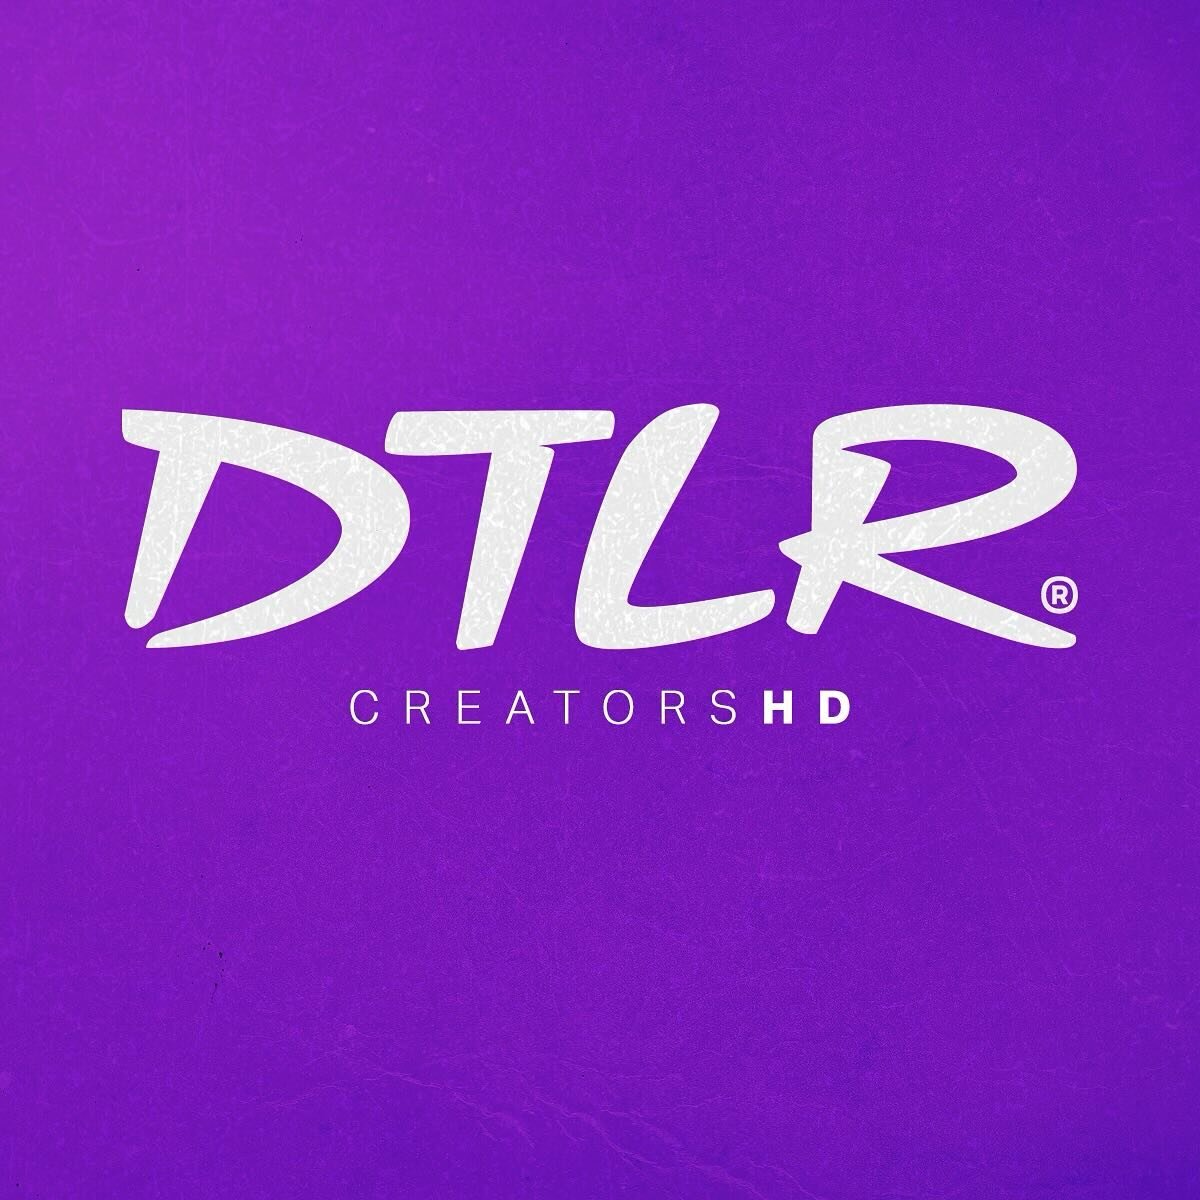 It&rsquo;s always dope for us to have the opportunity to work with brands we grew up on @dtlrofficial! Salute @djquicksilva for the assist.

Here&rsquo;s a few assets we created in quarter 4 of last year. 

Stay tuned for more in 2024! Your Fashion. 